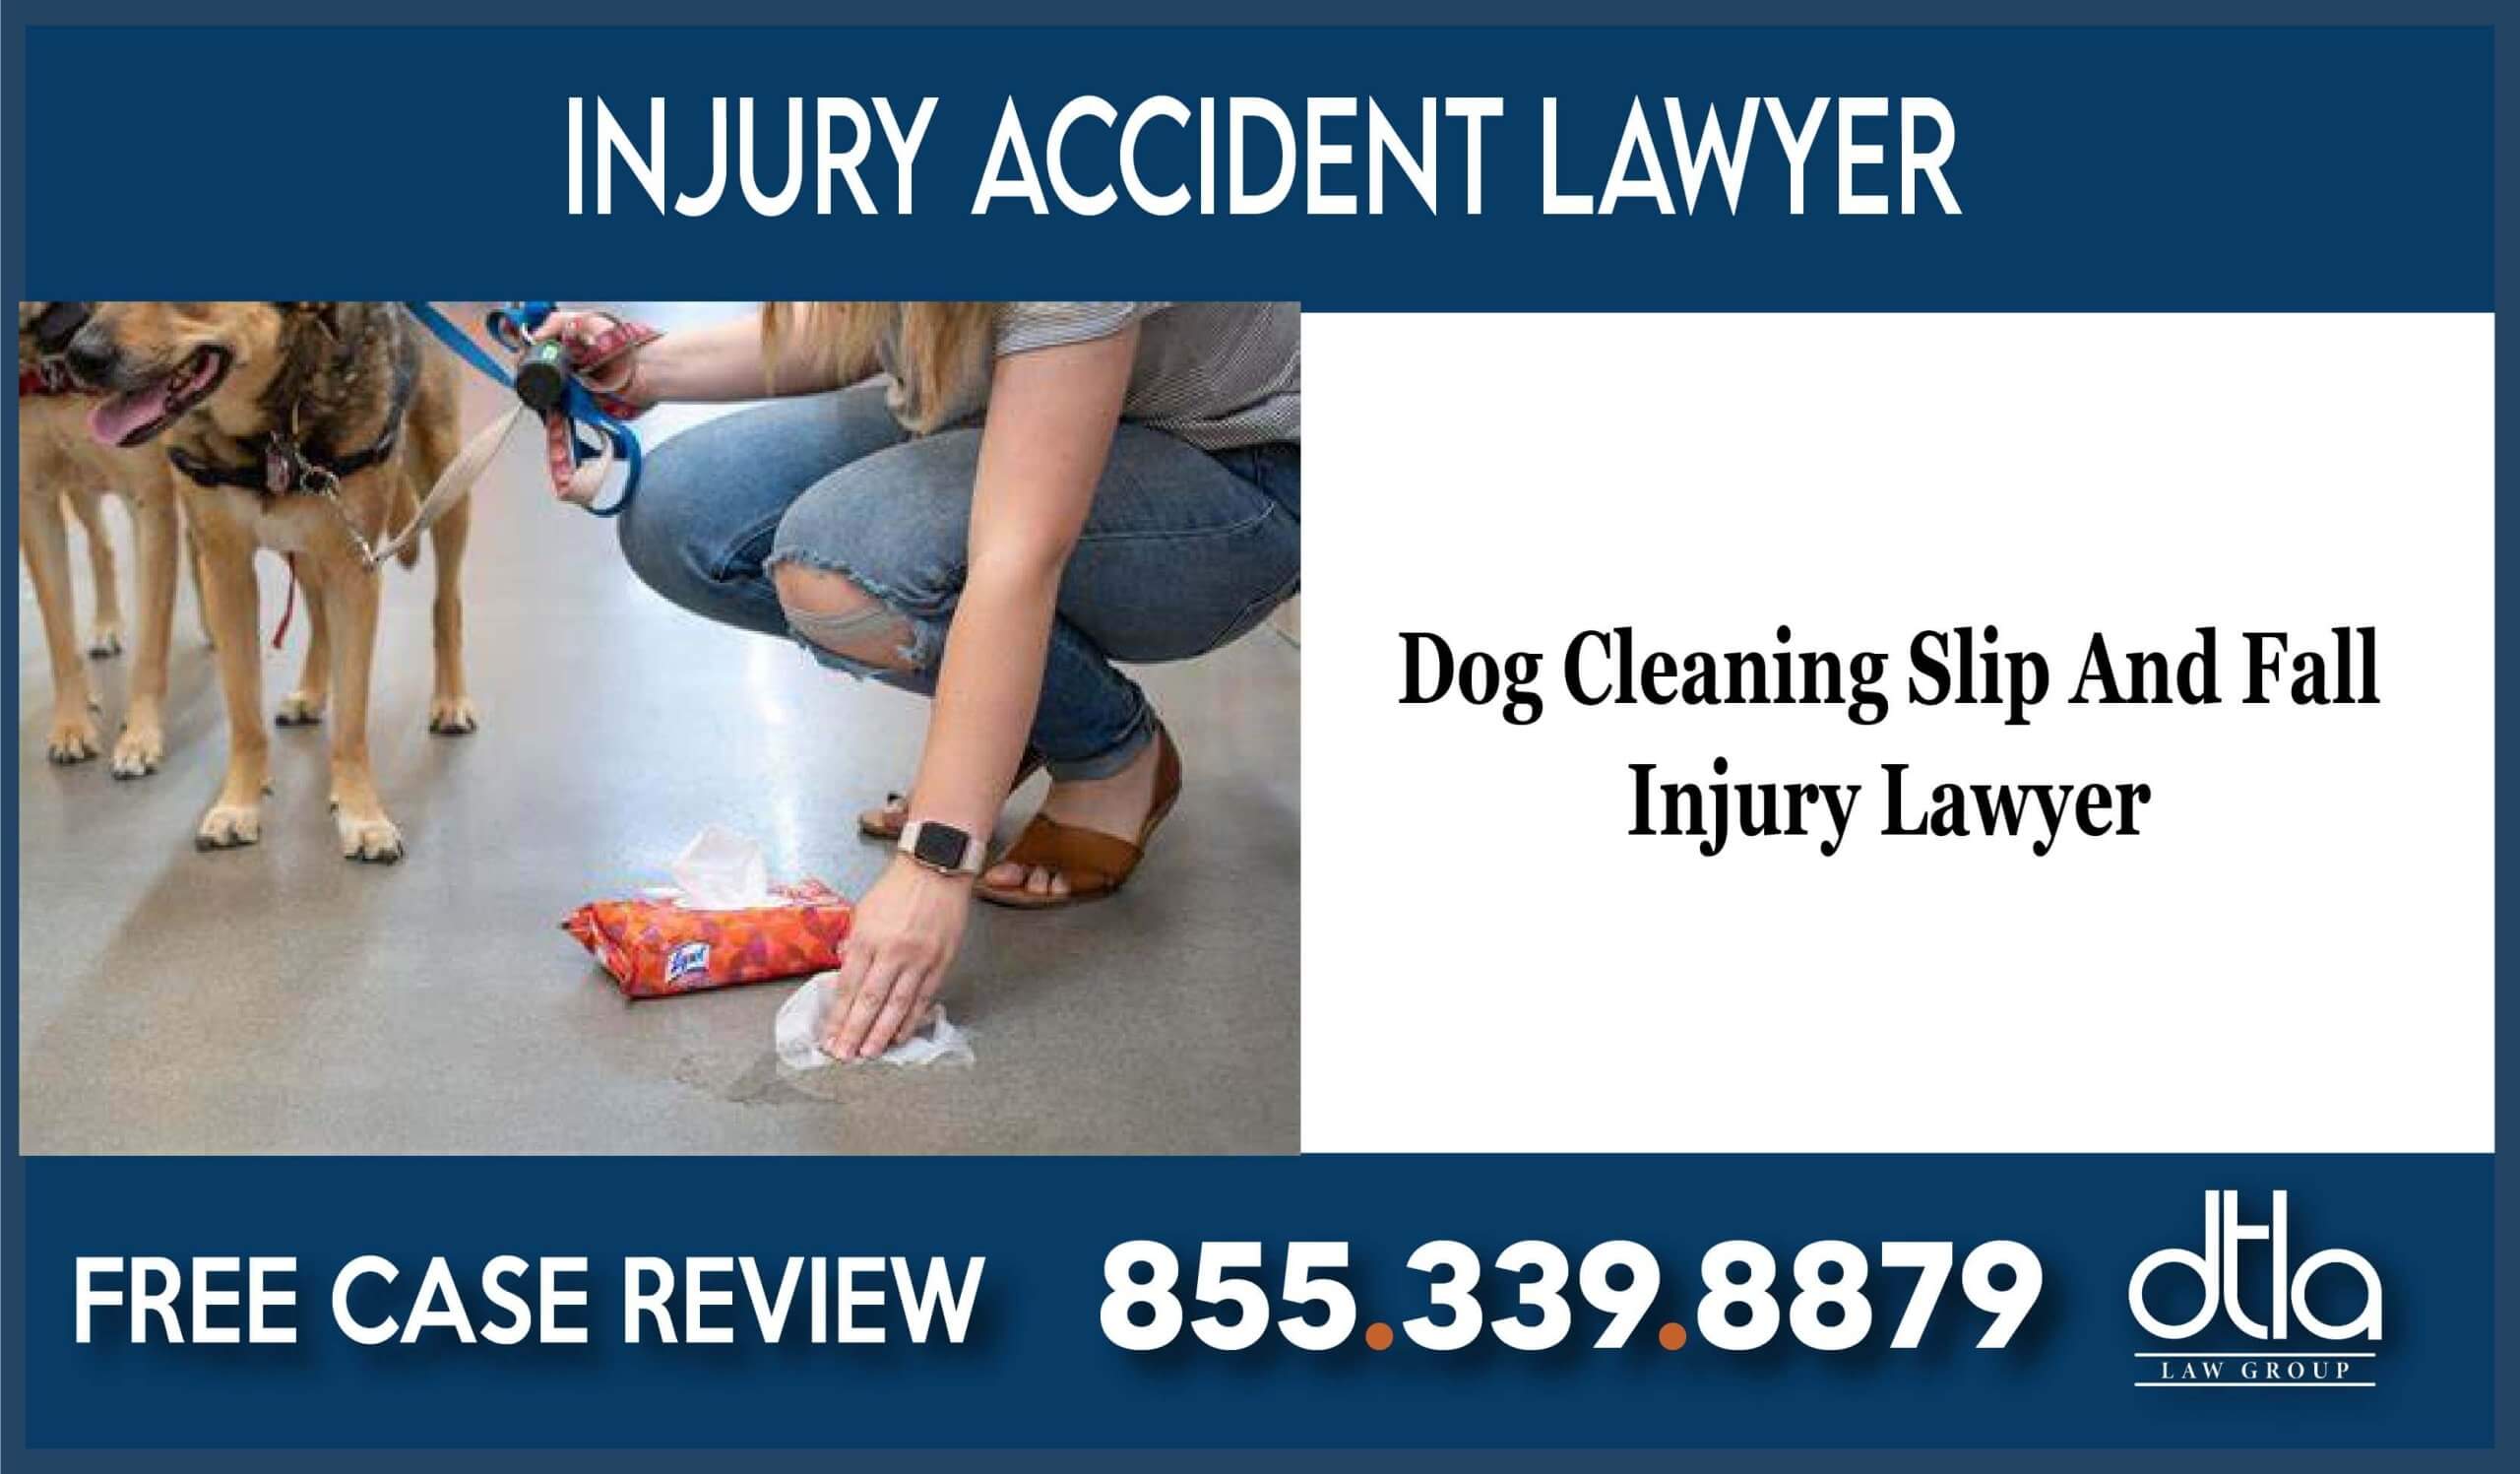 Dog Cleaning Slip And Fall Injury Lawyer incident accident liability attorney sue